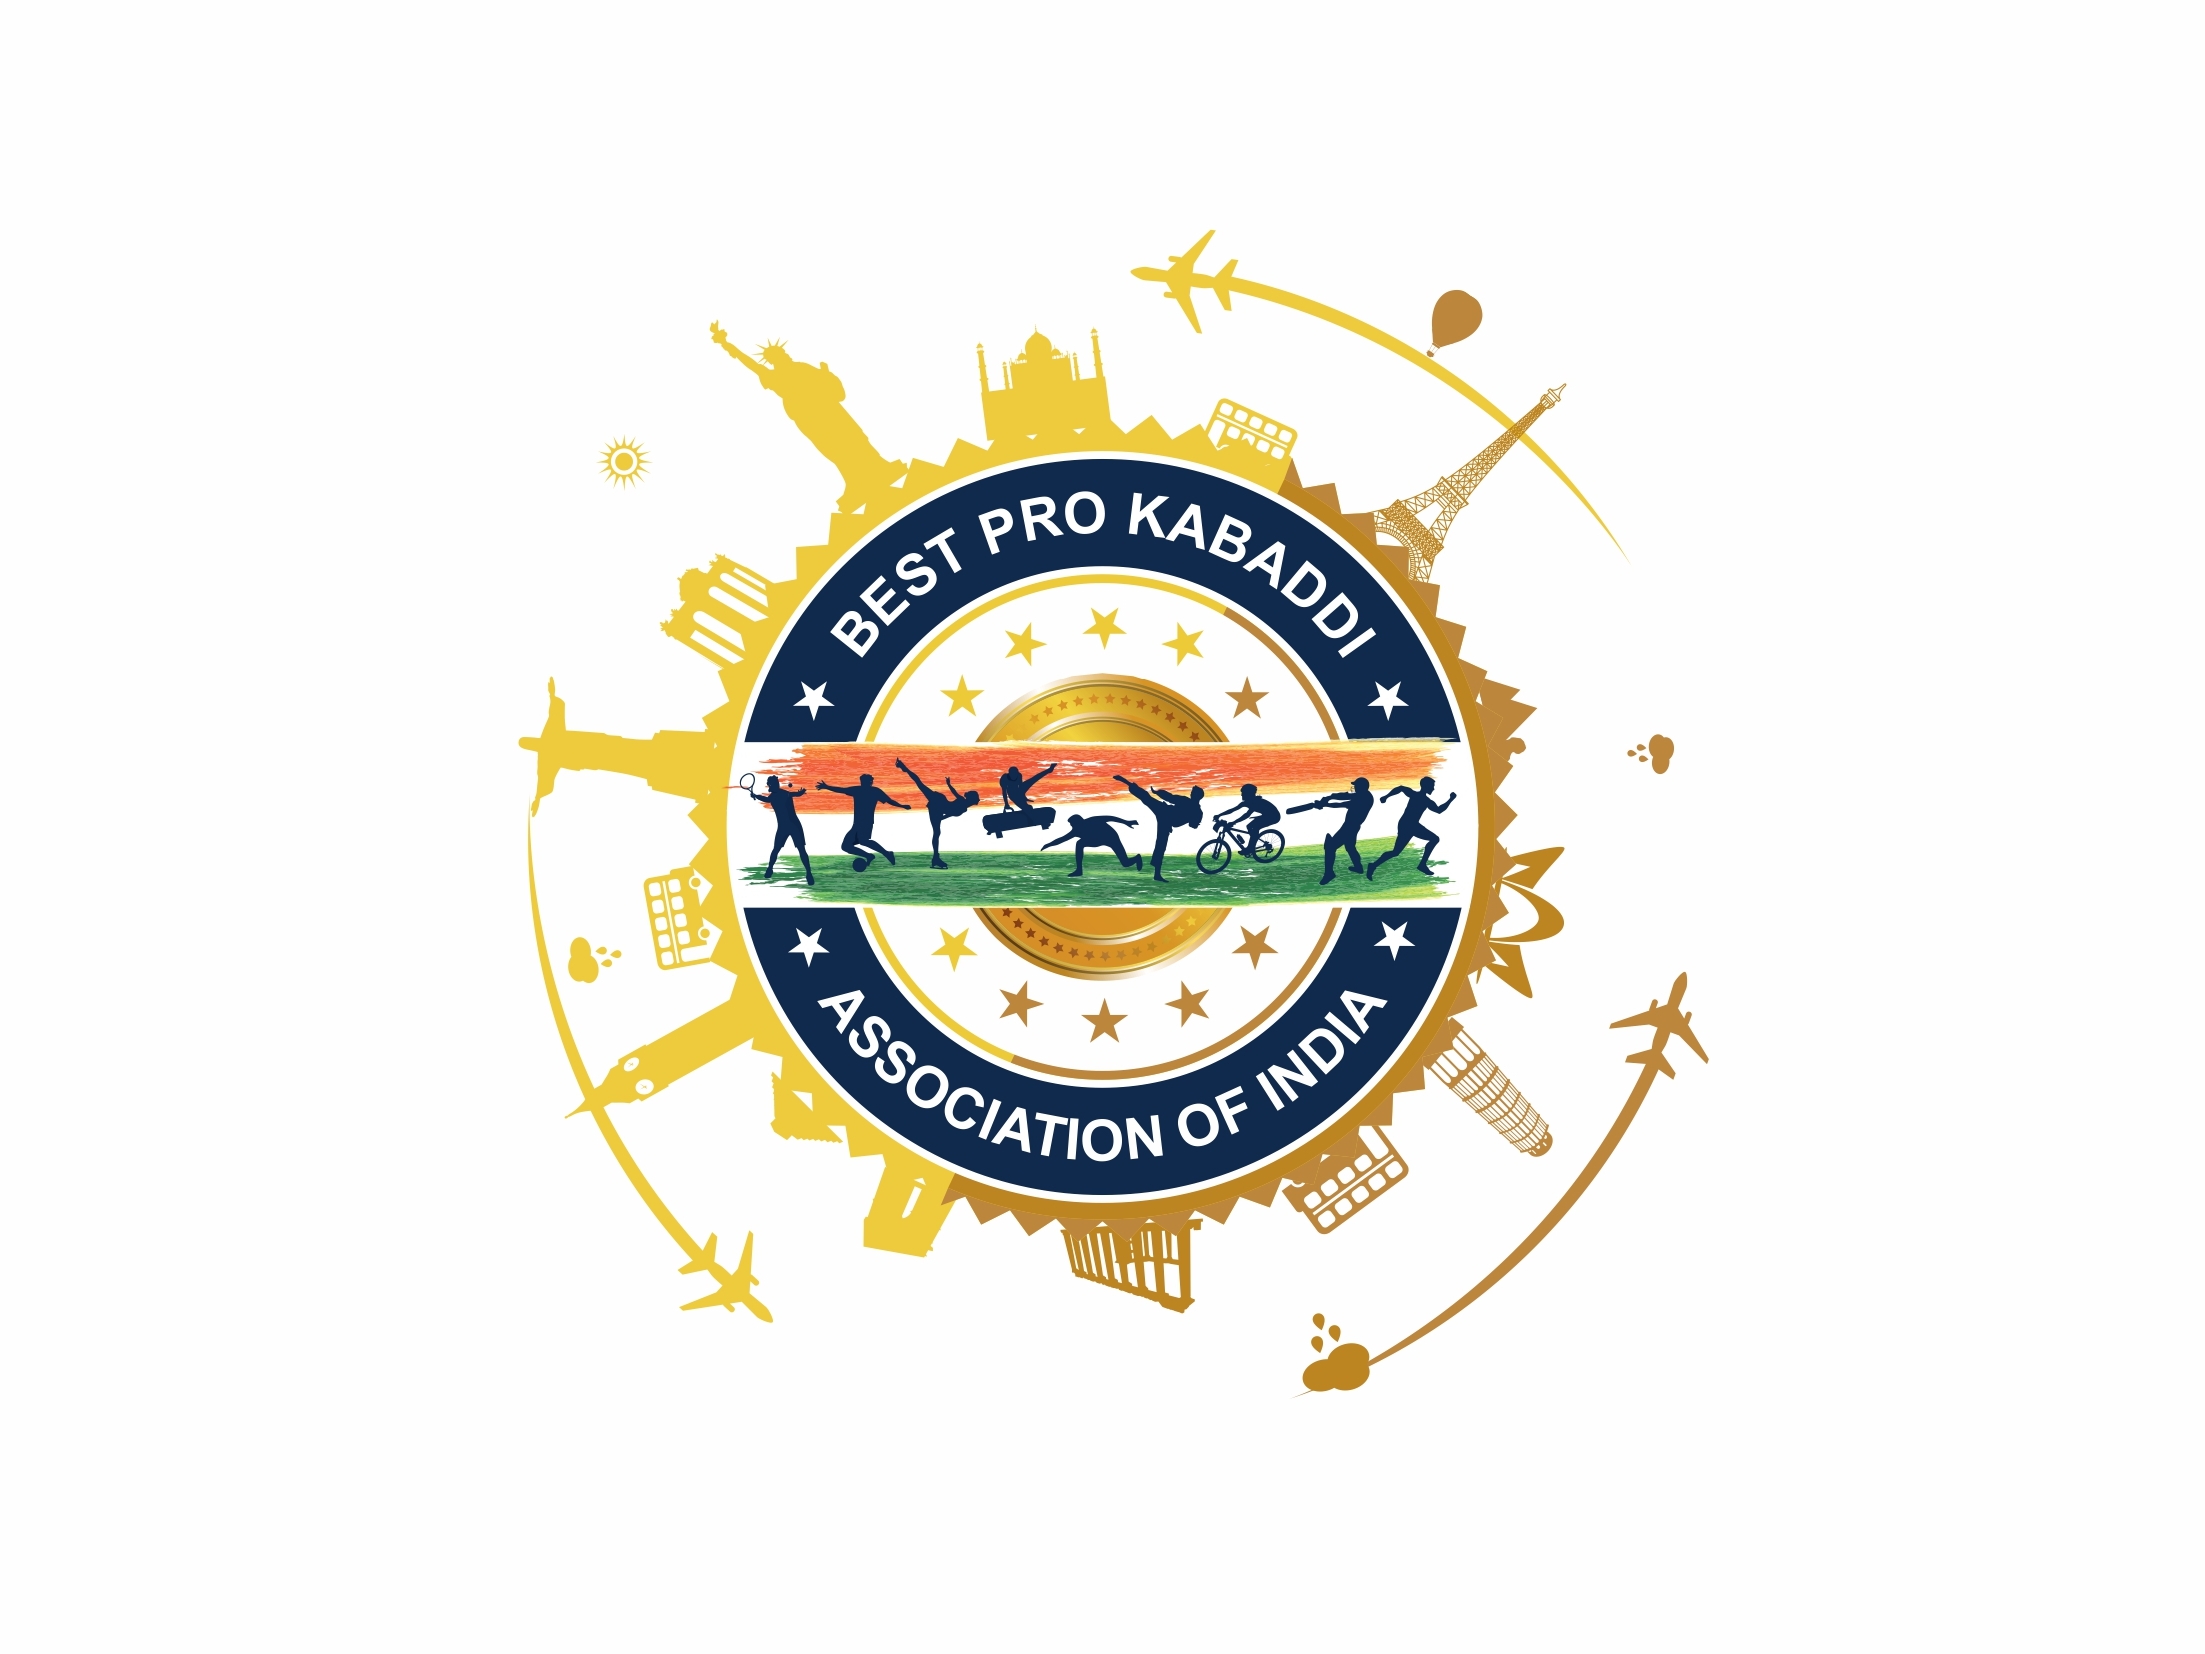 The Ahmedabad Engg Mfrs Association Logo | Cybermedia research (CMR)